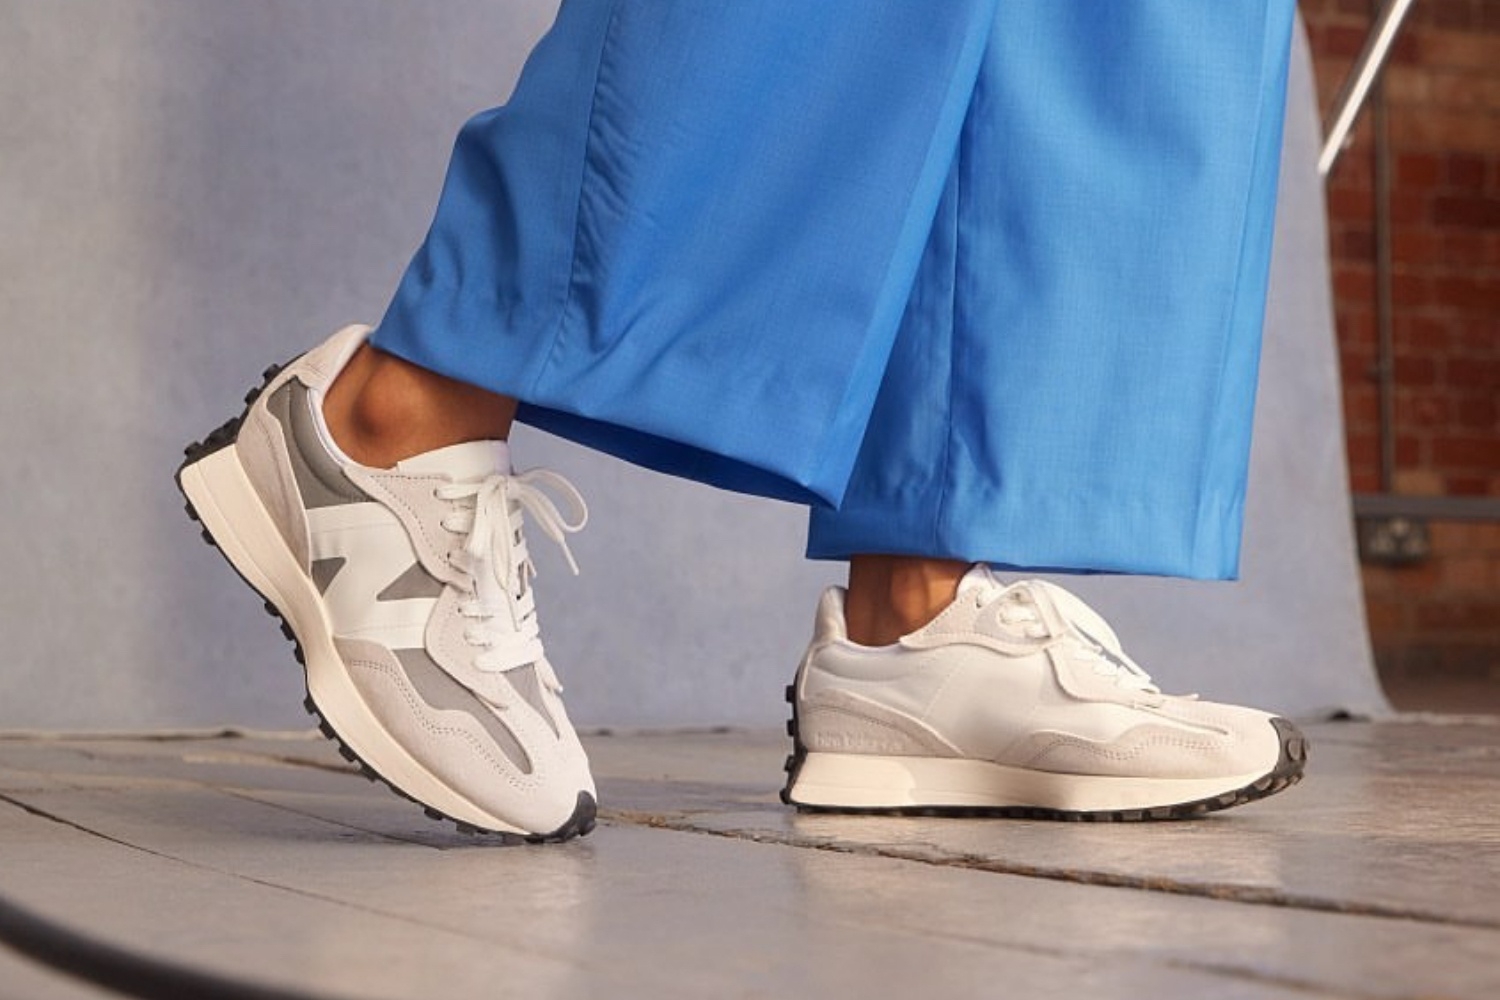 Take a look at these New Balance Trend Sneakers for WMNS